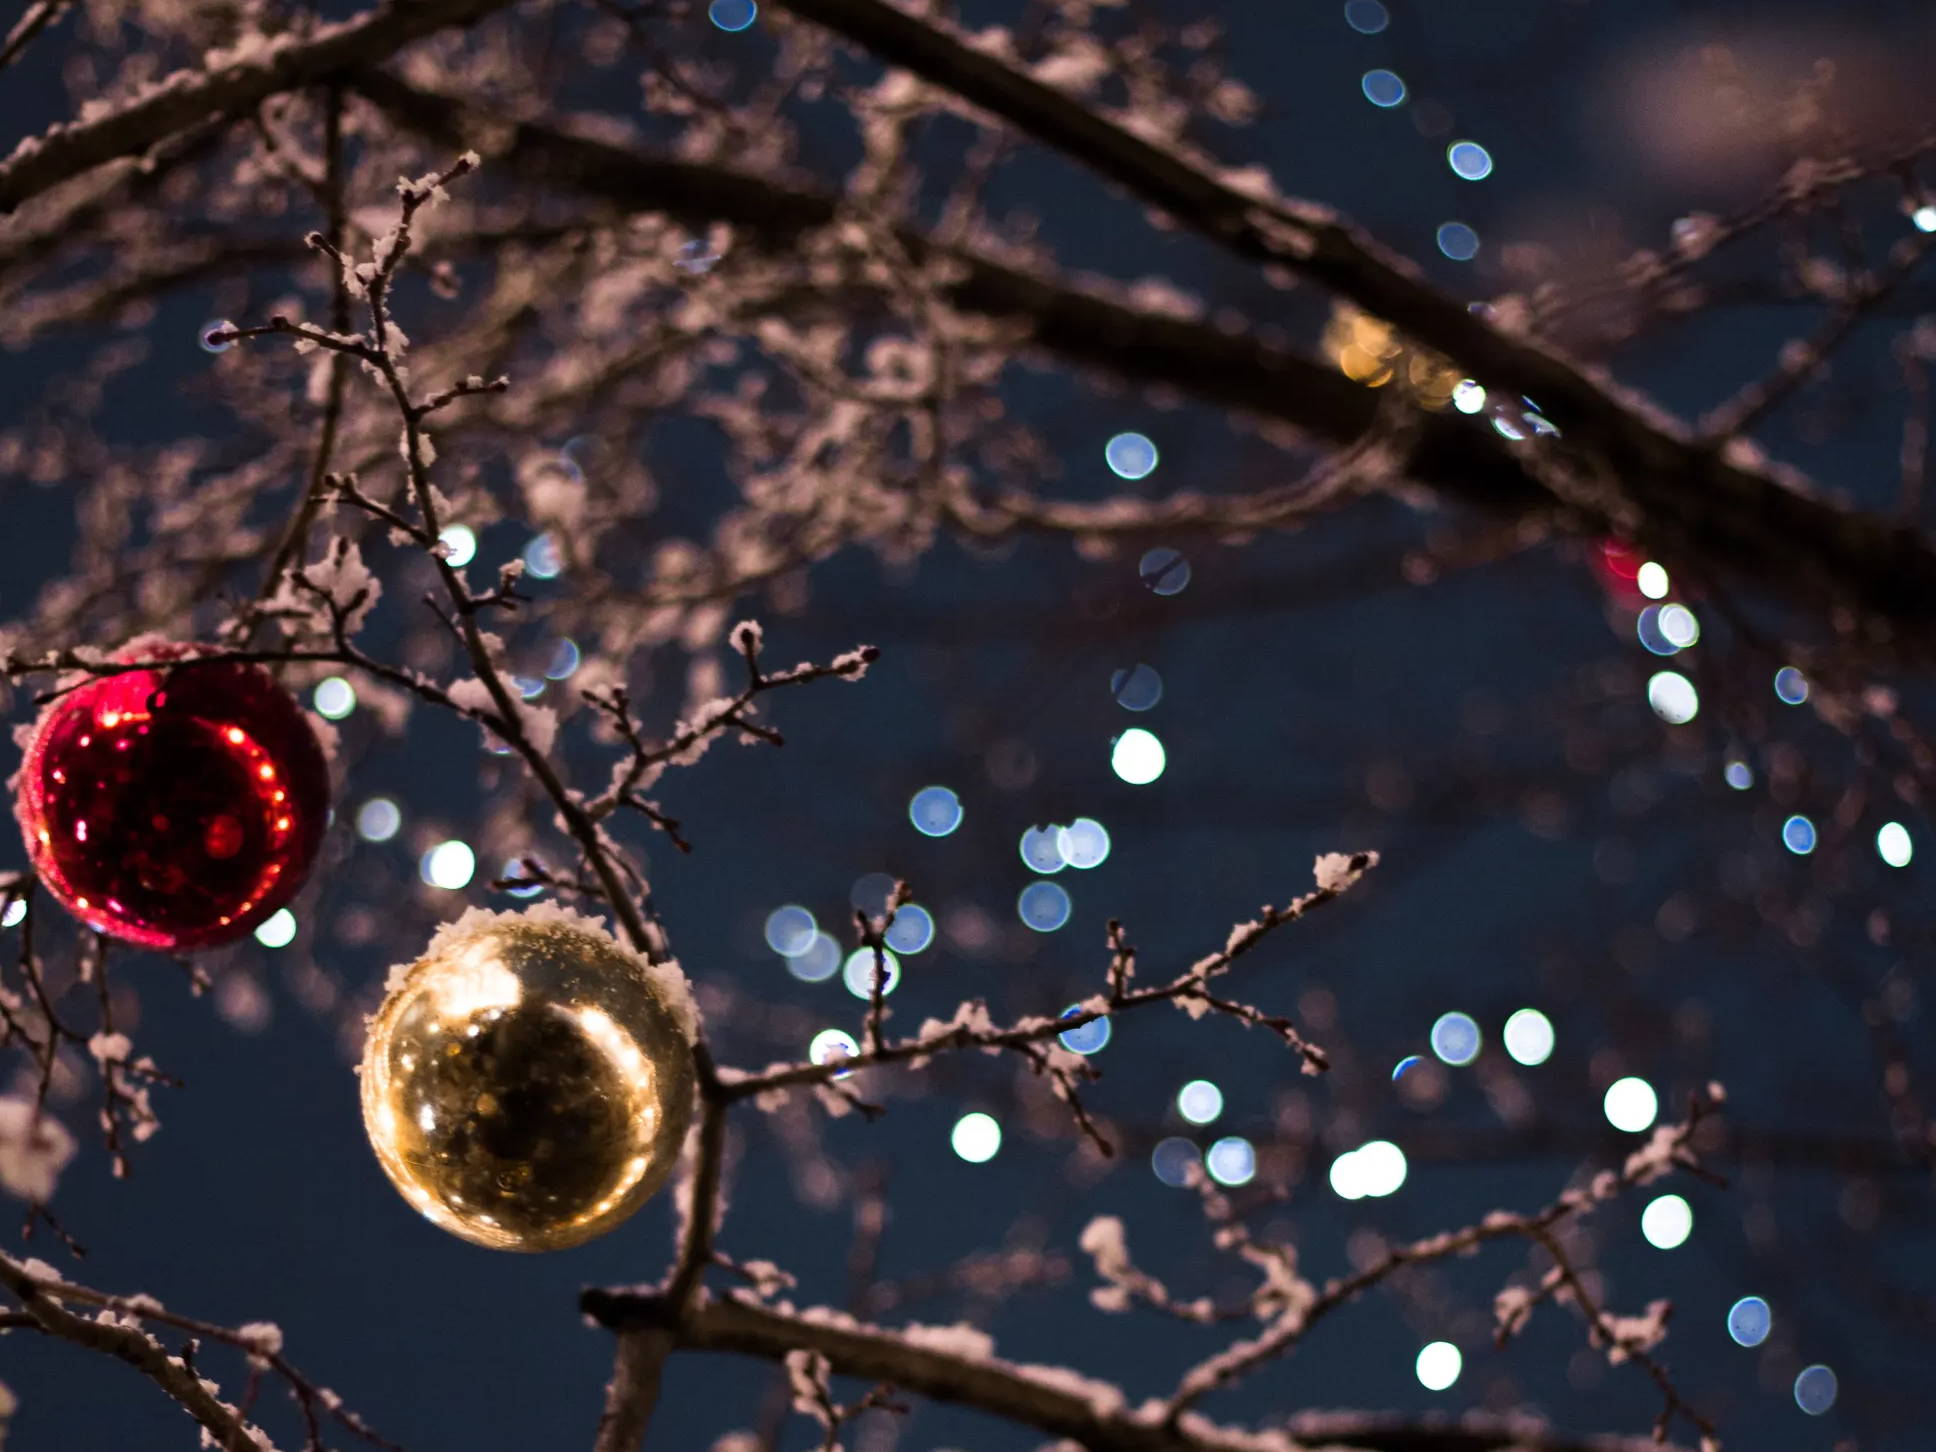 Ornaments illuminated by Christmas lights in a snowy tree